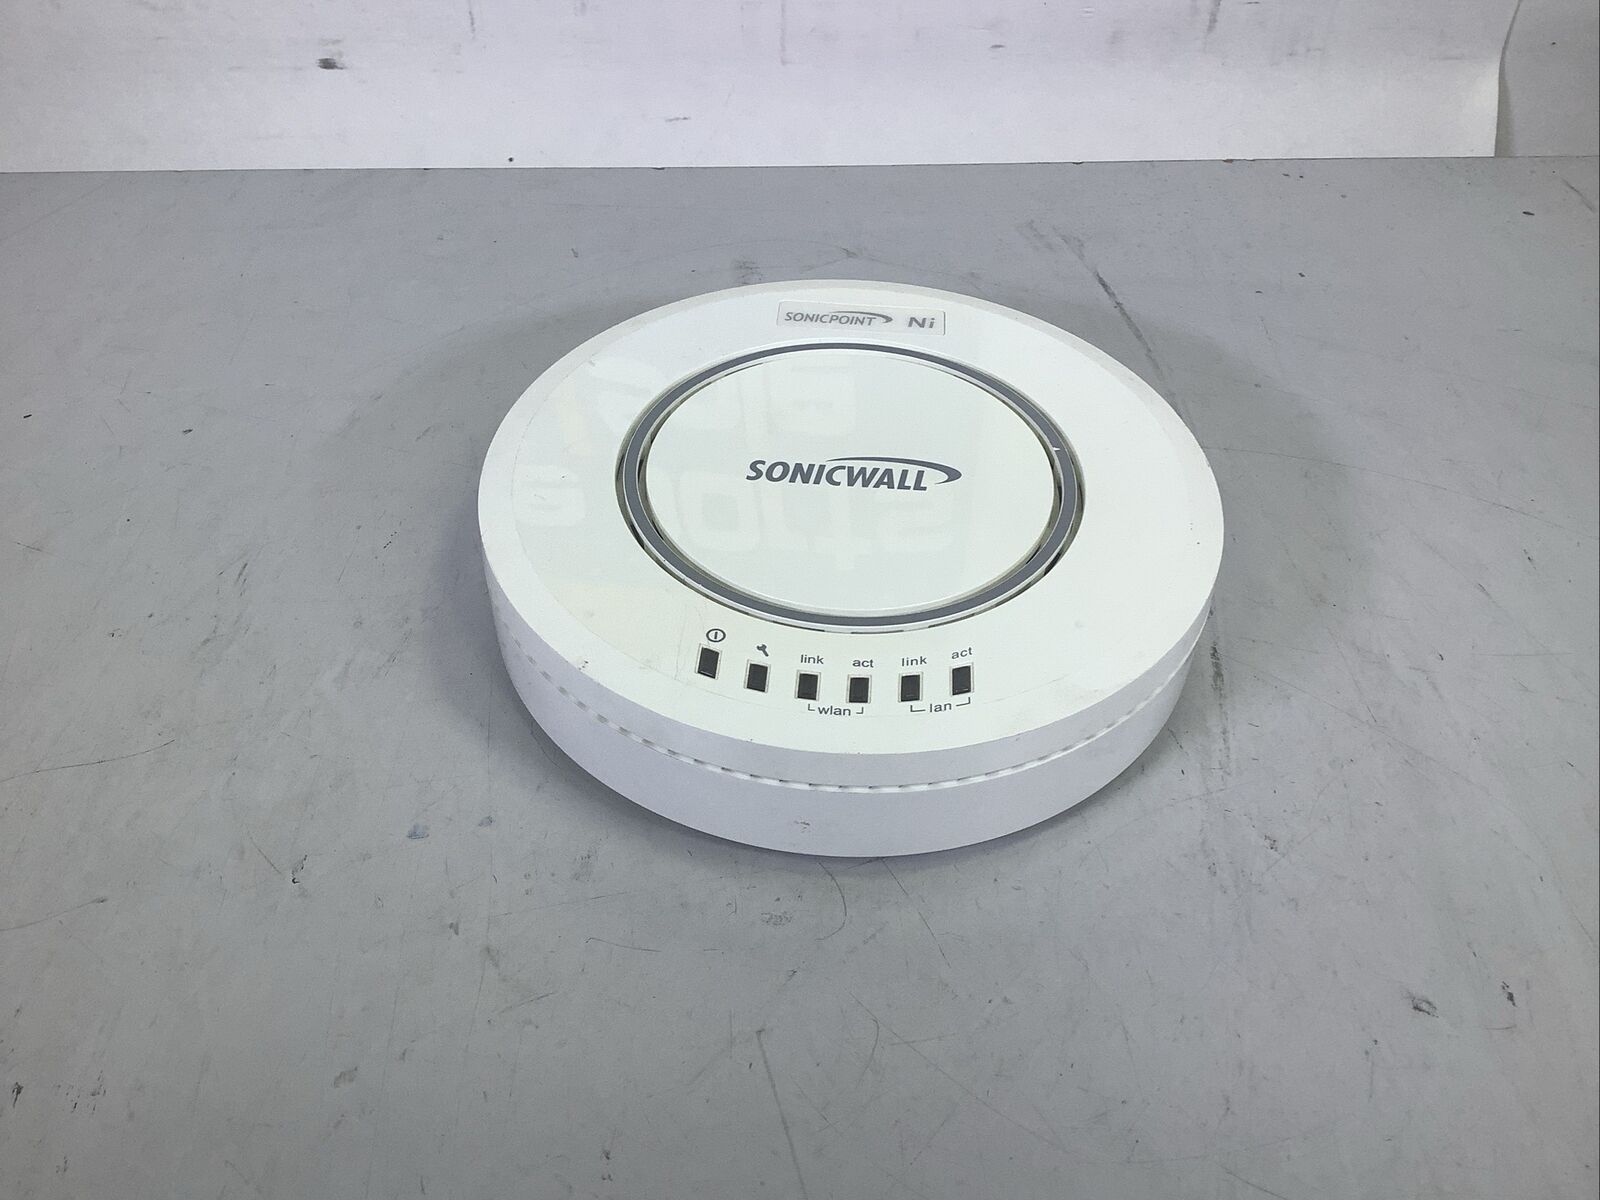 SonicWALL APL21-083 SonicPoint-Ni Wireless Access Point - NG C4B